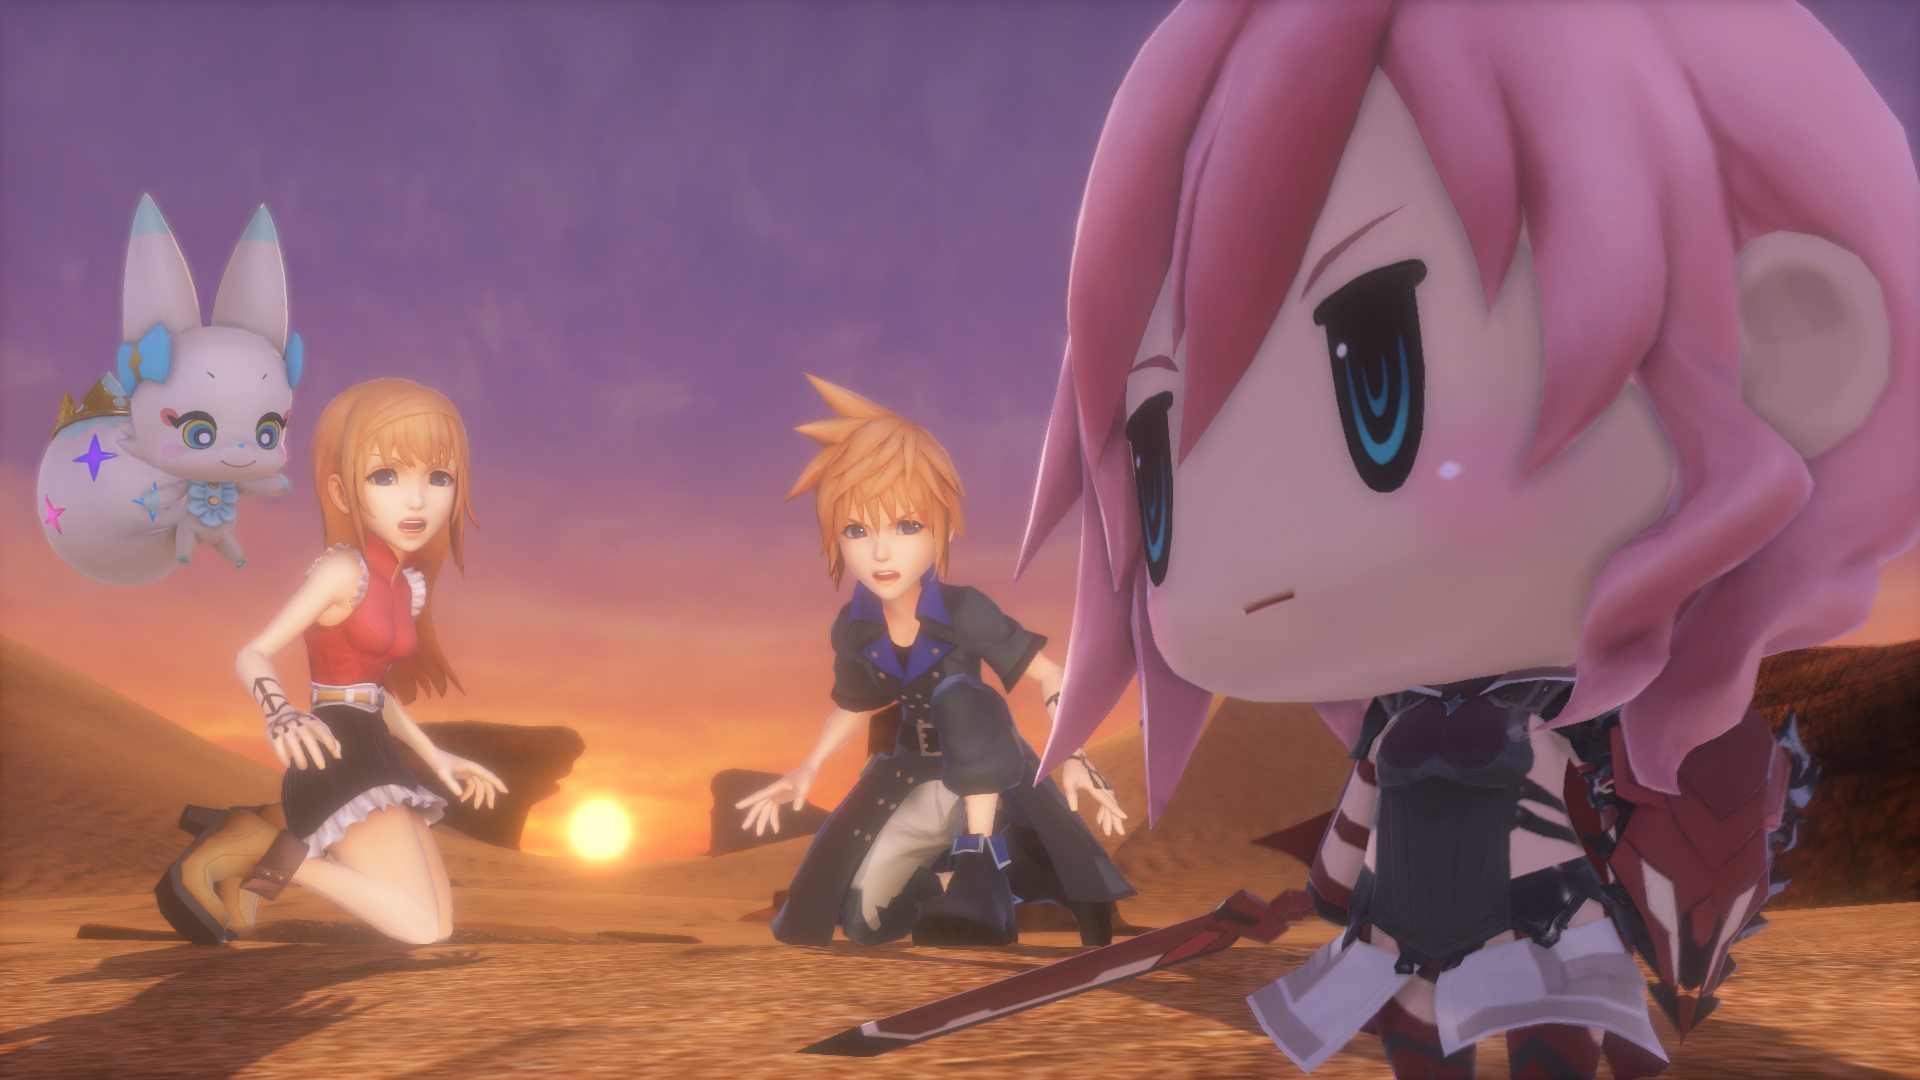 WORLD OF FINAL FANTASY to be launched on 25th October for PS4 and PS Vita 24